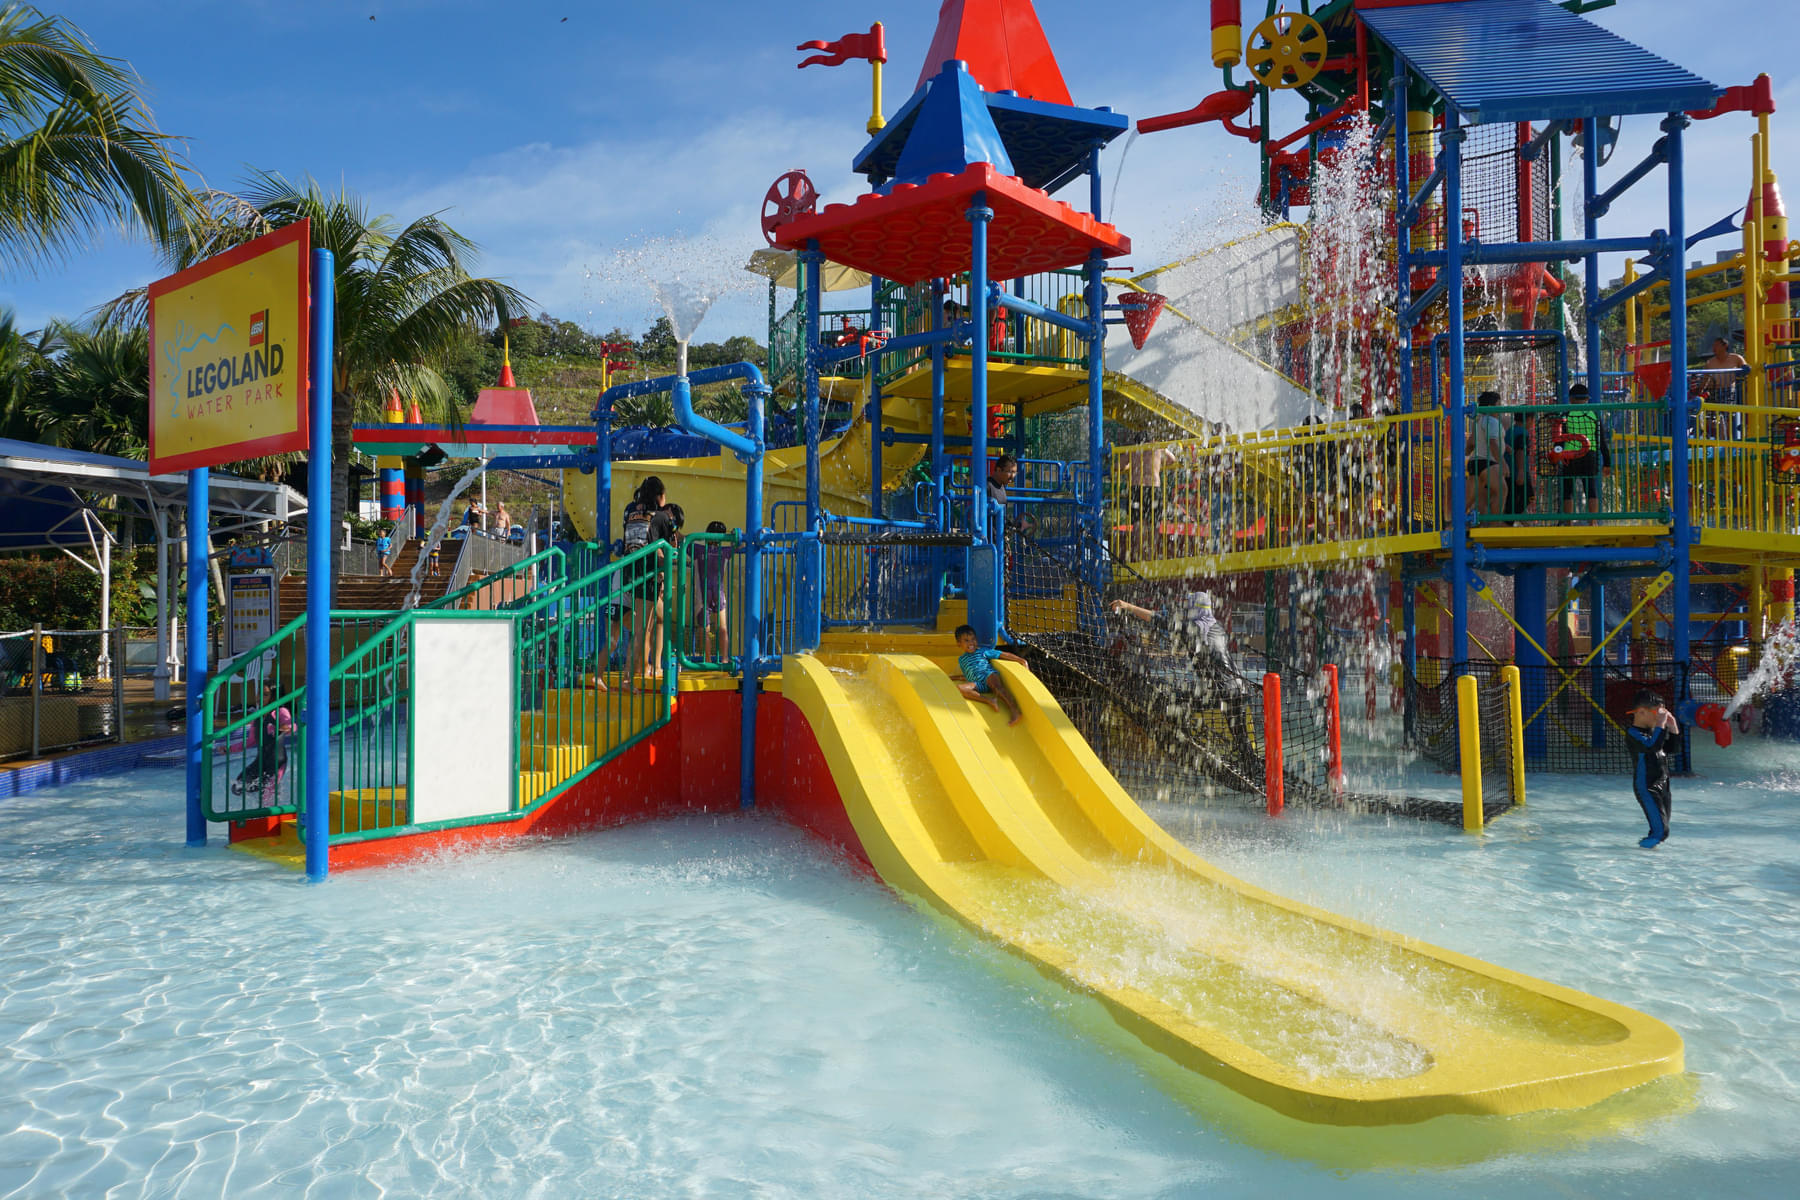 Have a cool experience at Legoland Malaysia Water Park